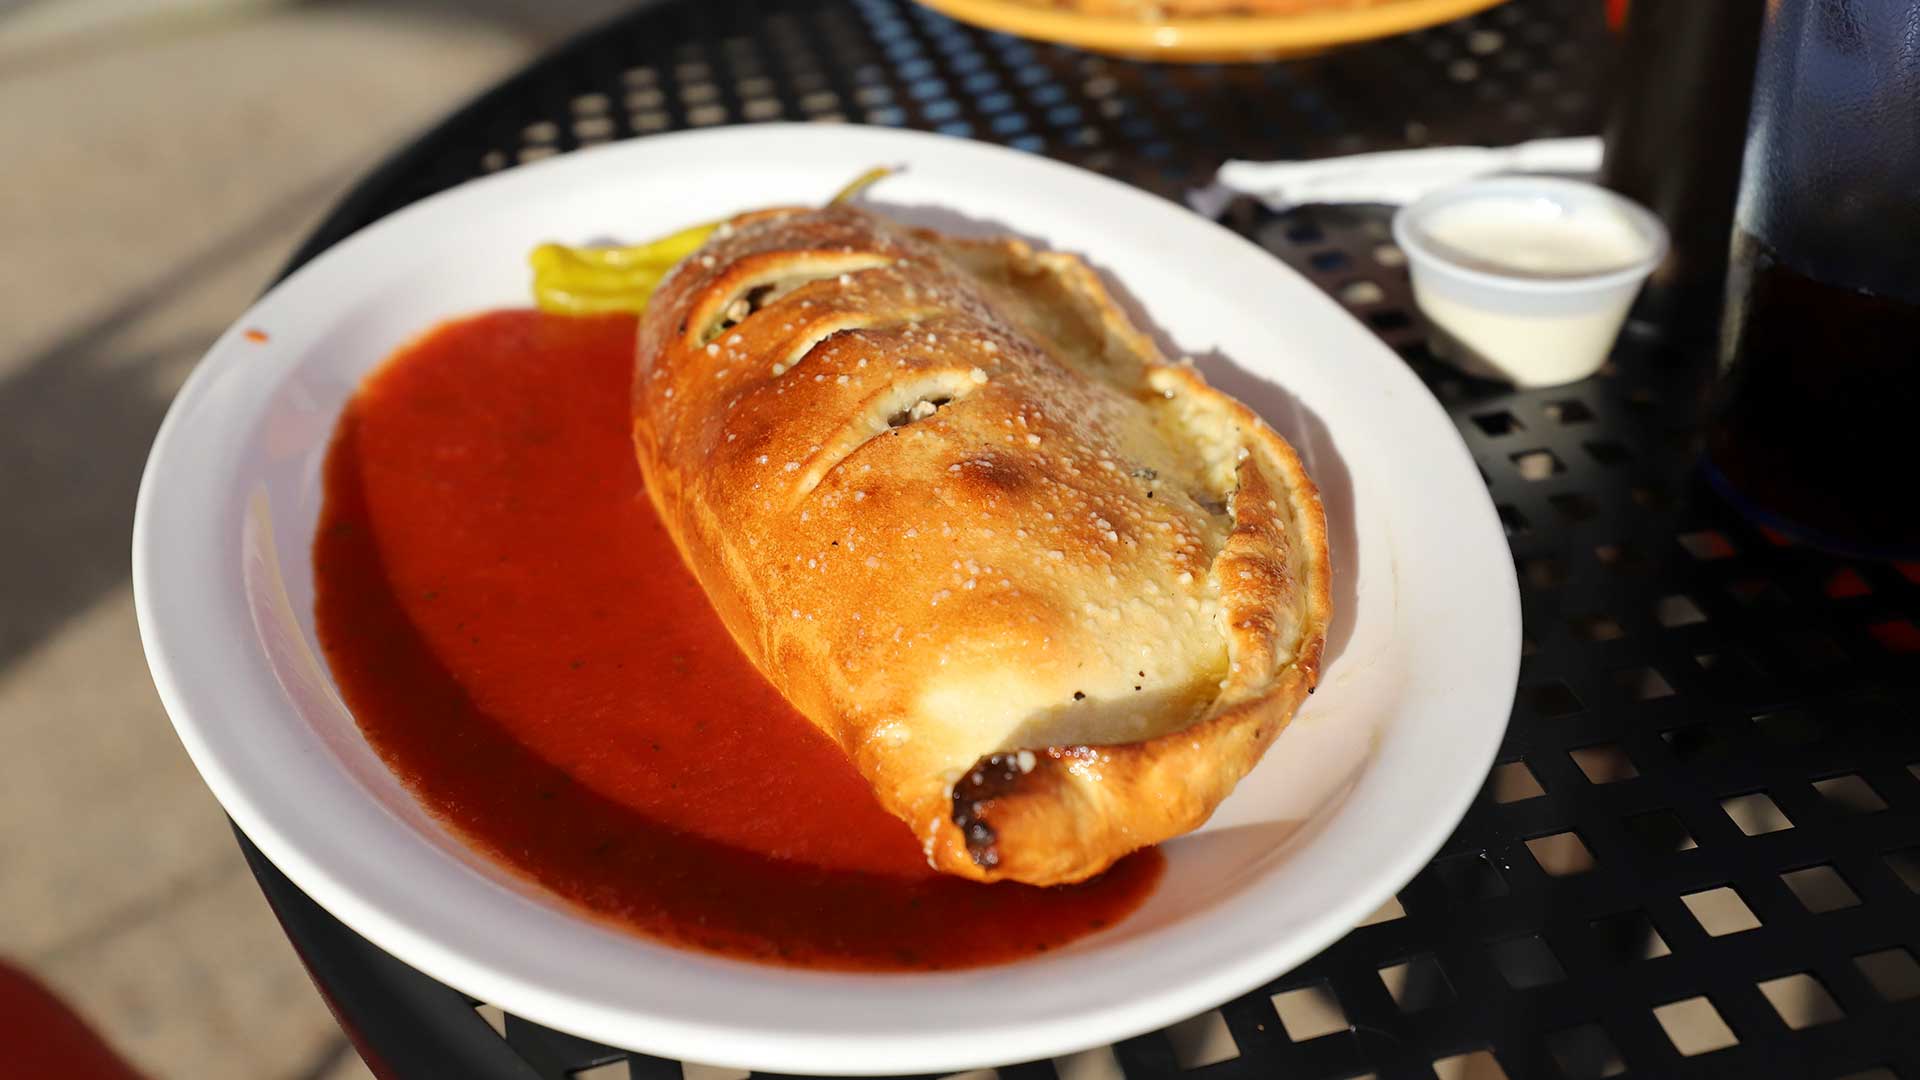 Discover Oneida County’s restaurants | Calzone on the outdoor dining area at Bambinos Pizza